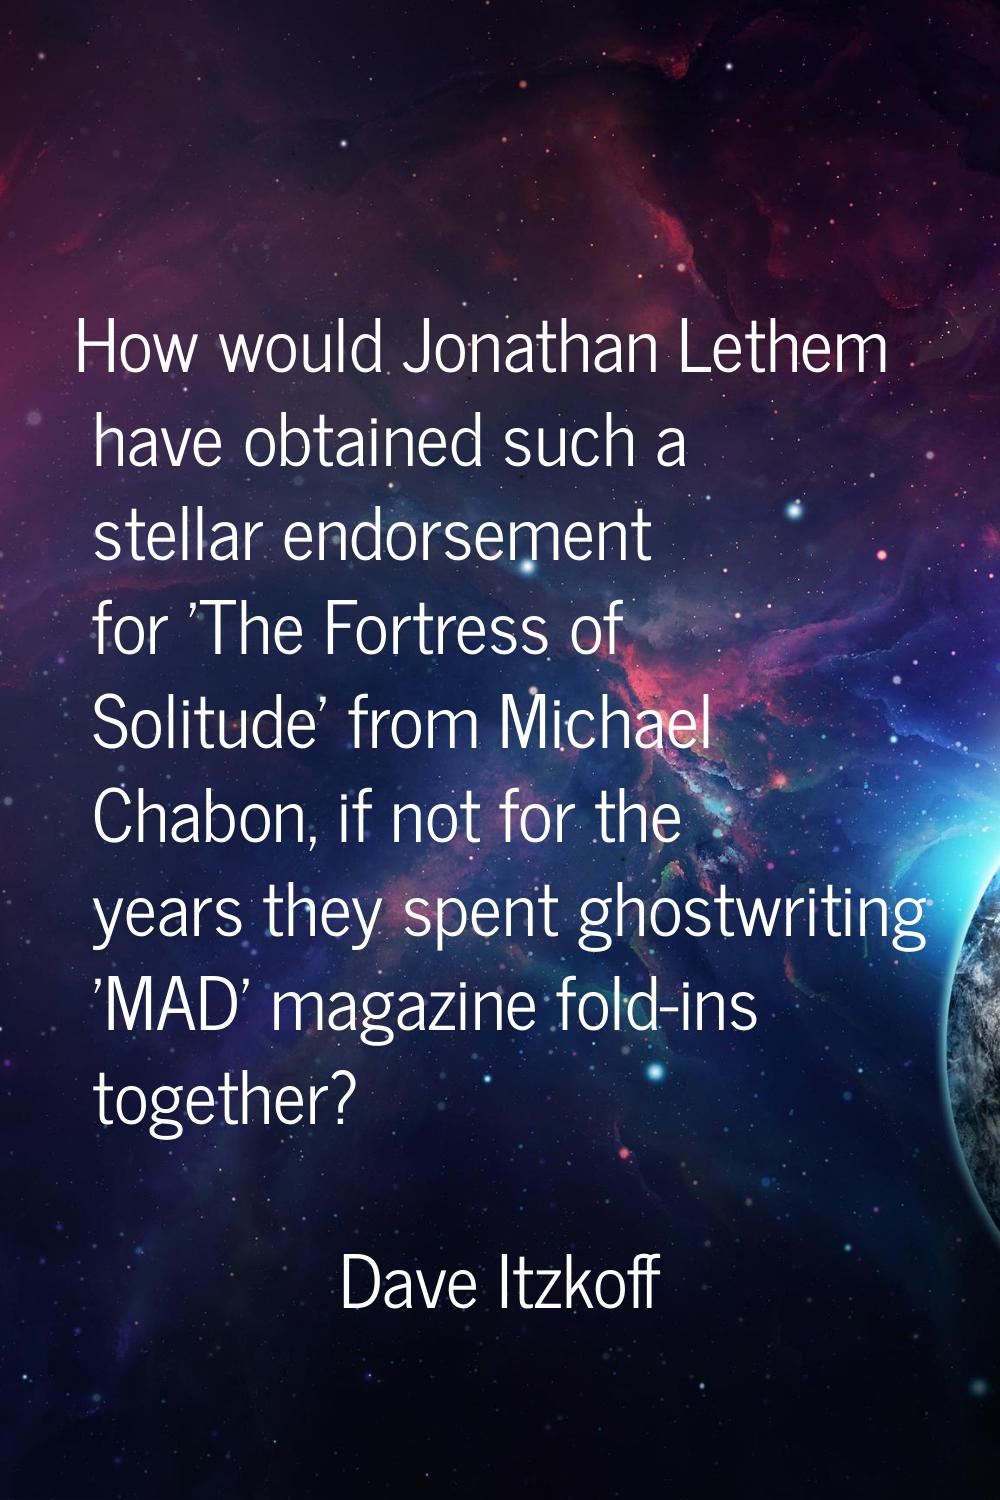 How would Jonathan Lethem have obtained such a stellar endorsement for 'The Fortress of Solitude' f